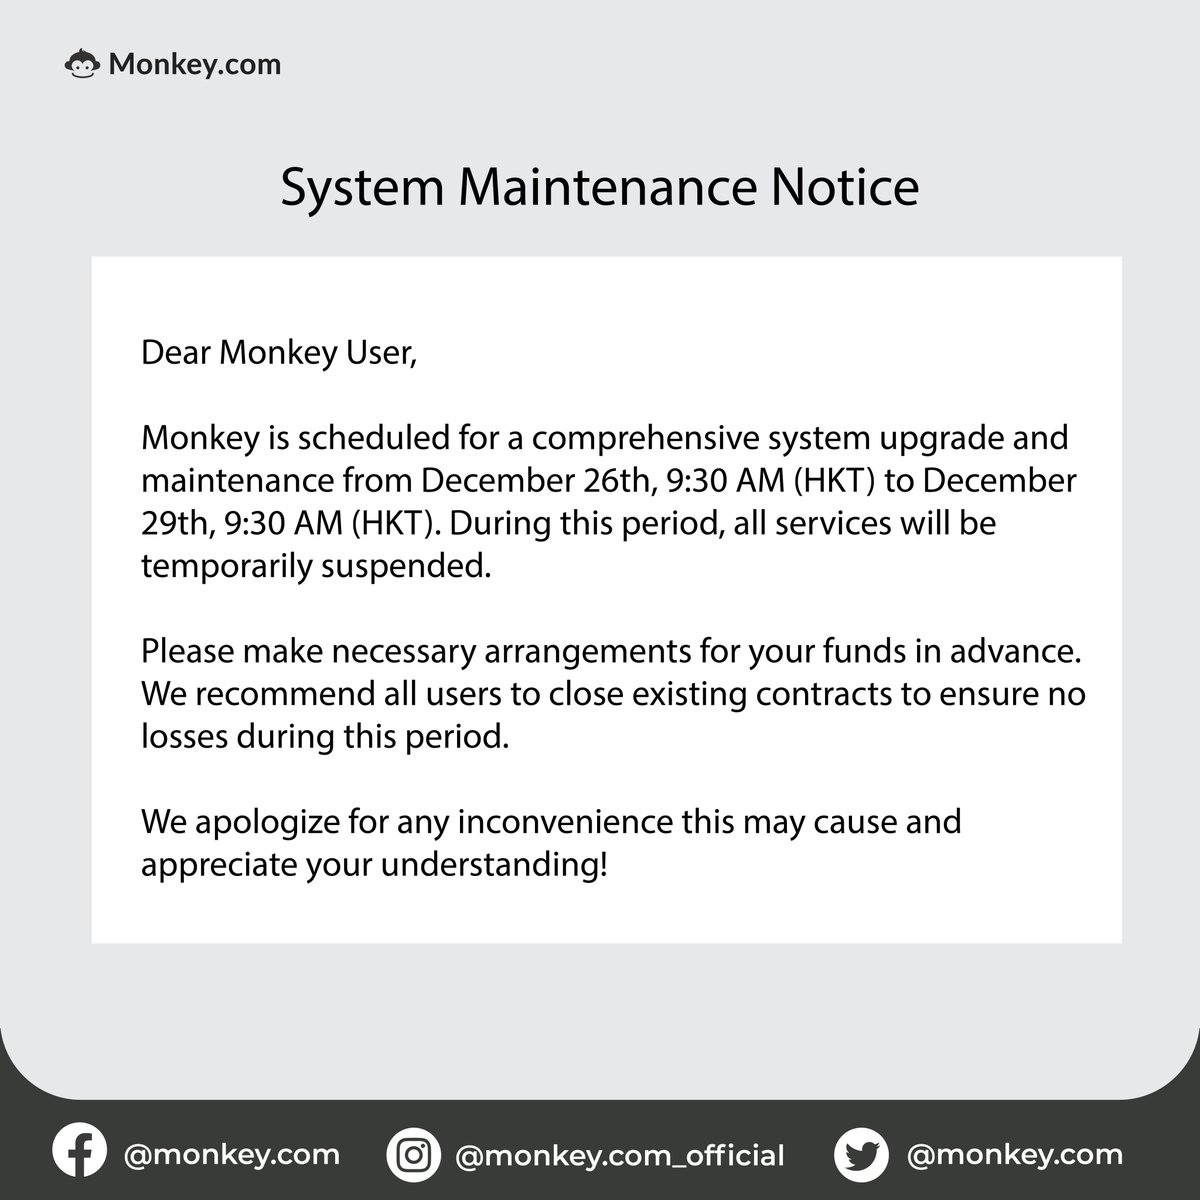 📌Announcement📌

Monkey is scheduled for a comprehensive system upgrade and maintenance from December 26th, 9:30 AM (HKT) to December 29th, 9:30 AM (HKT). During this period, all services will be temporarily suspended. 

#systemupgrade